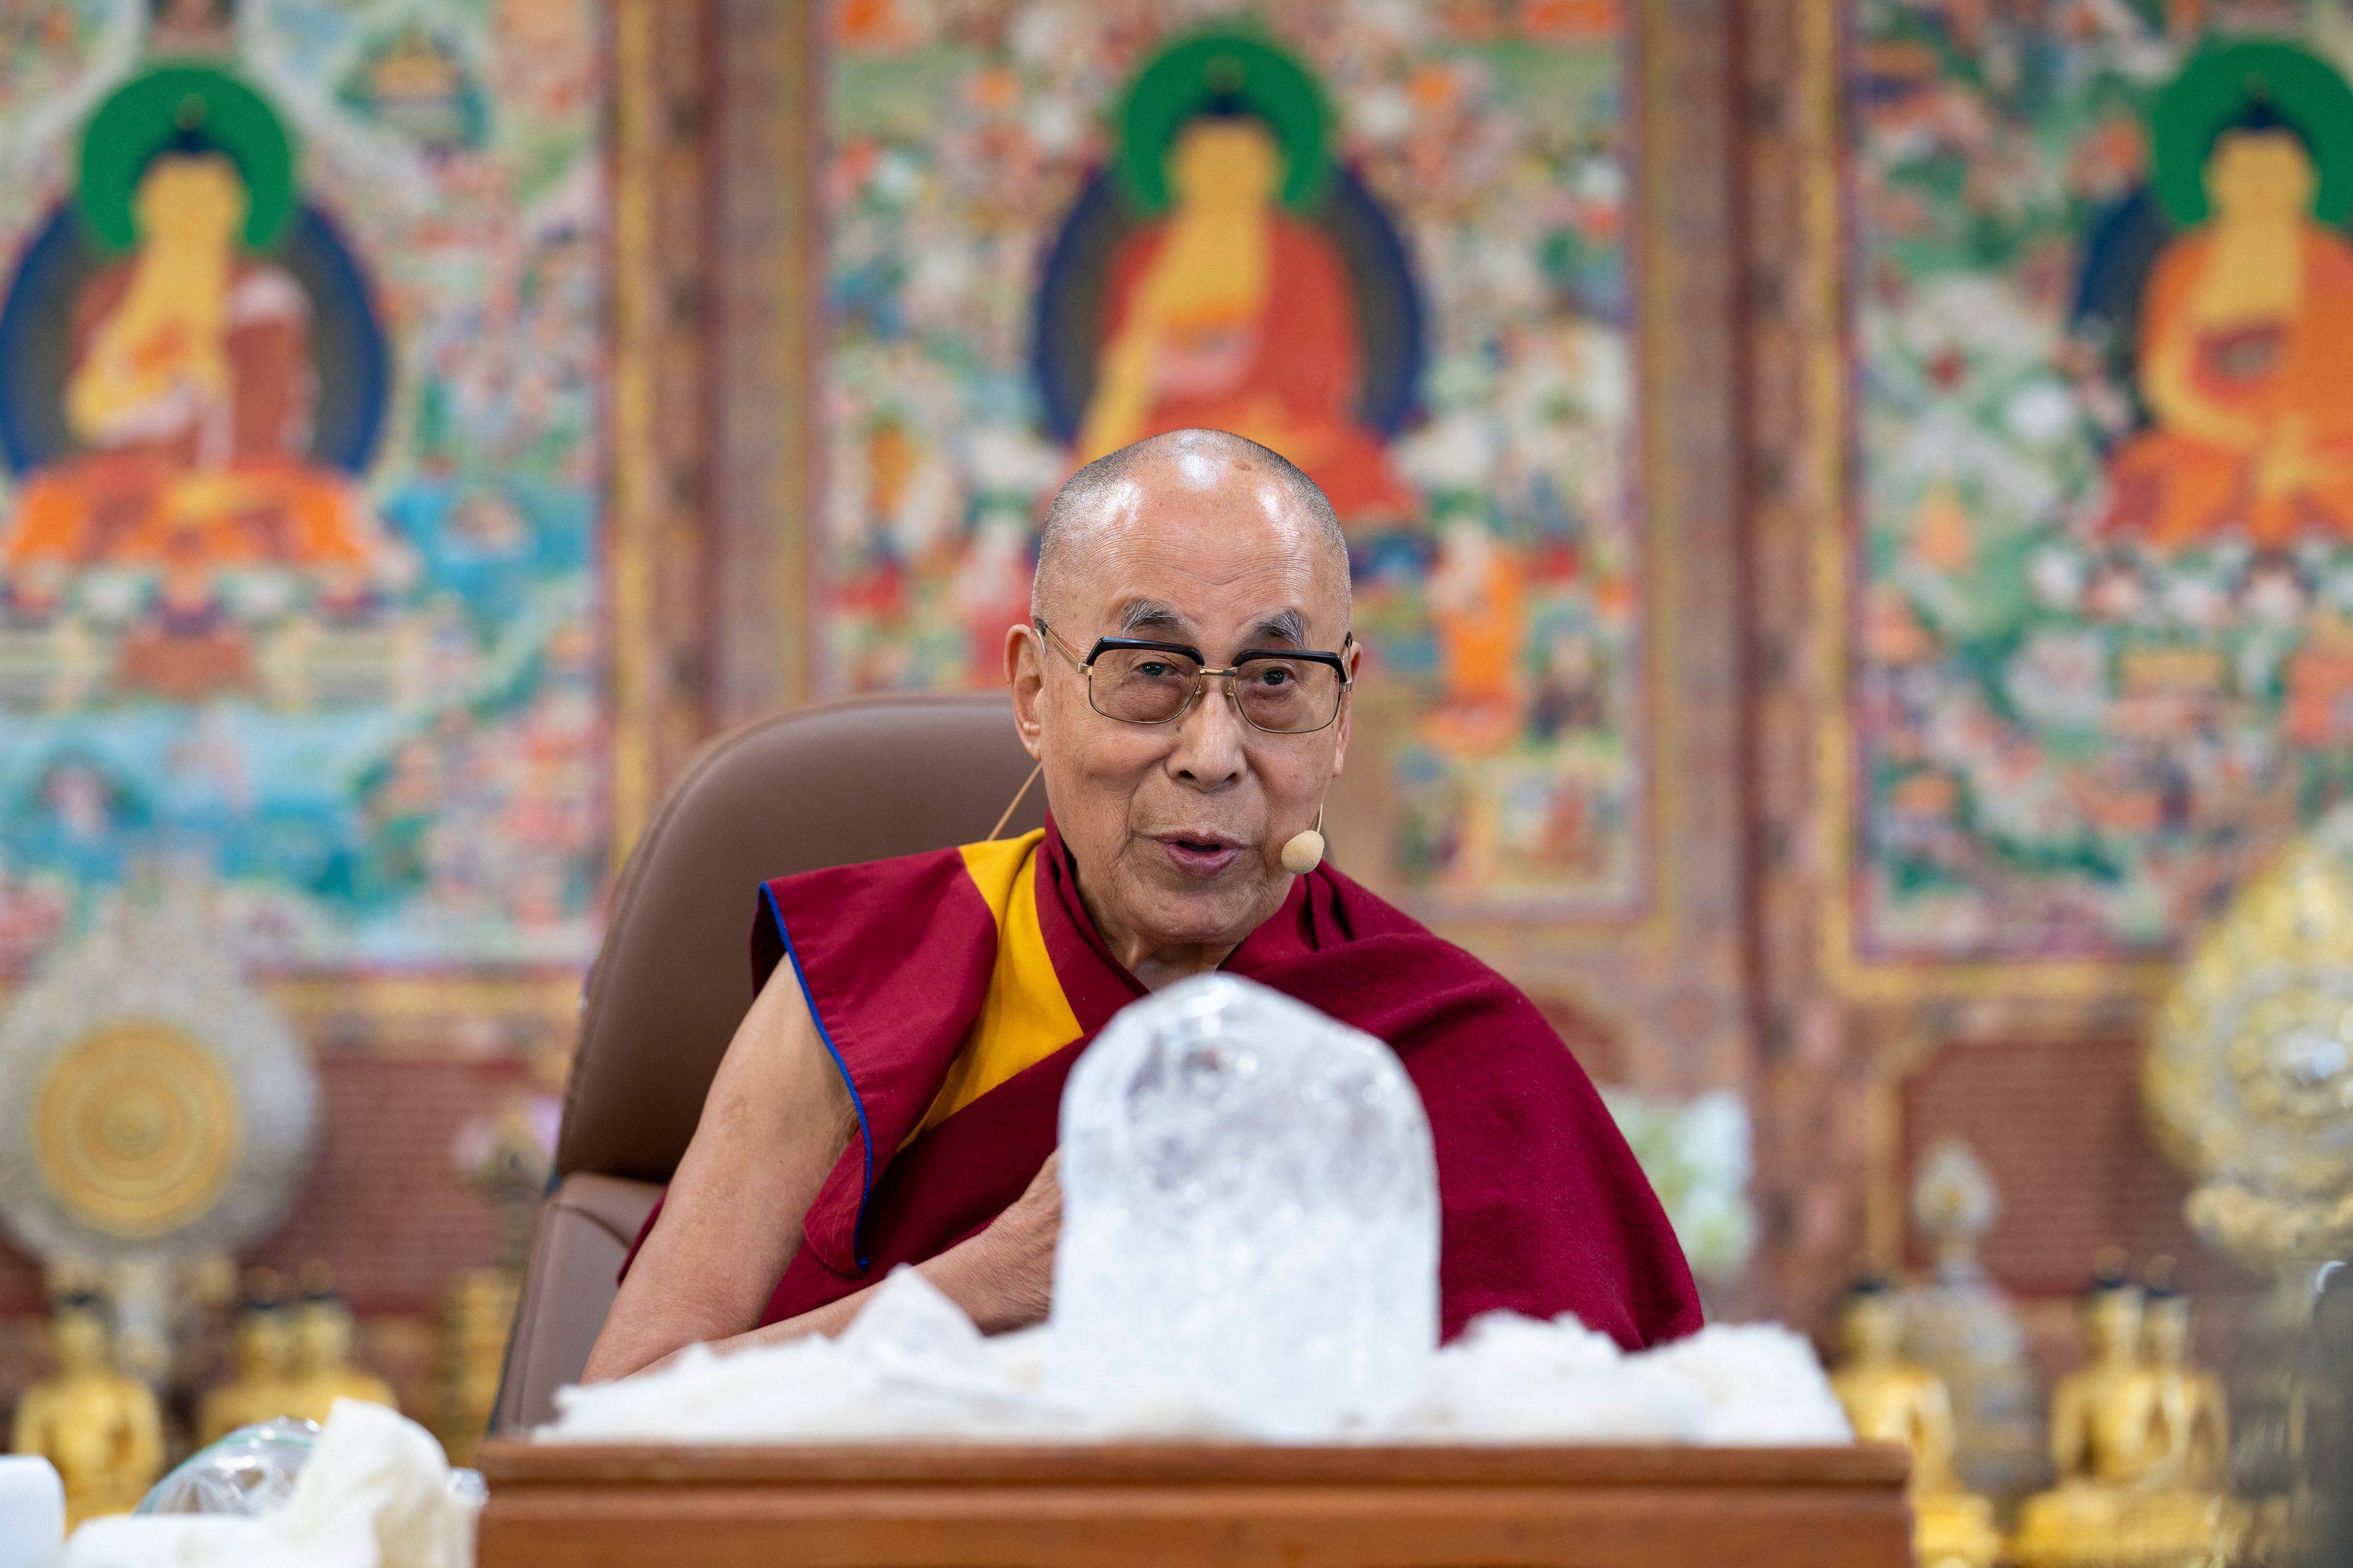 Tibetan spiritual leader the Dalai Lama with a block of ice from the Himalayas, talks about climate change. Photo: AFP